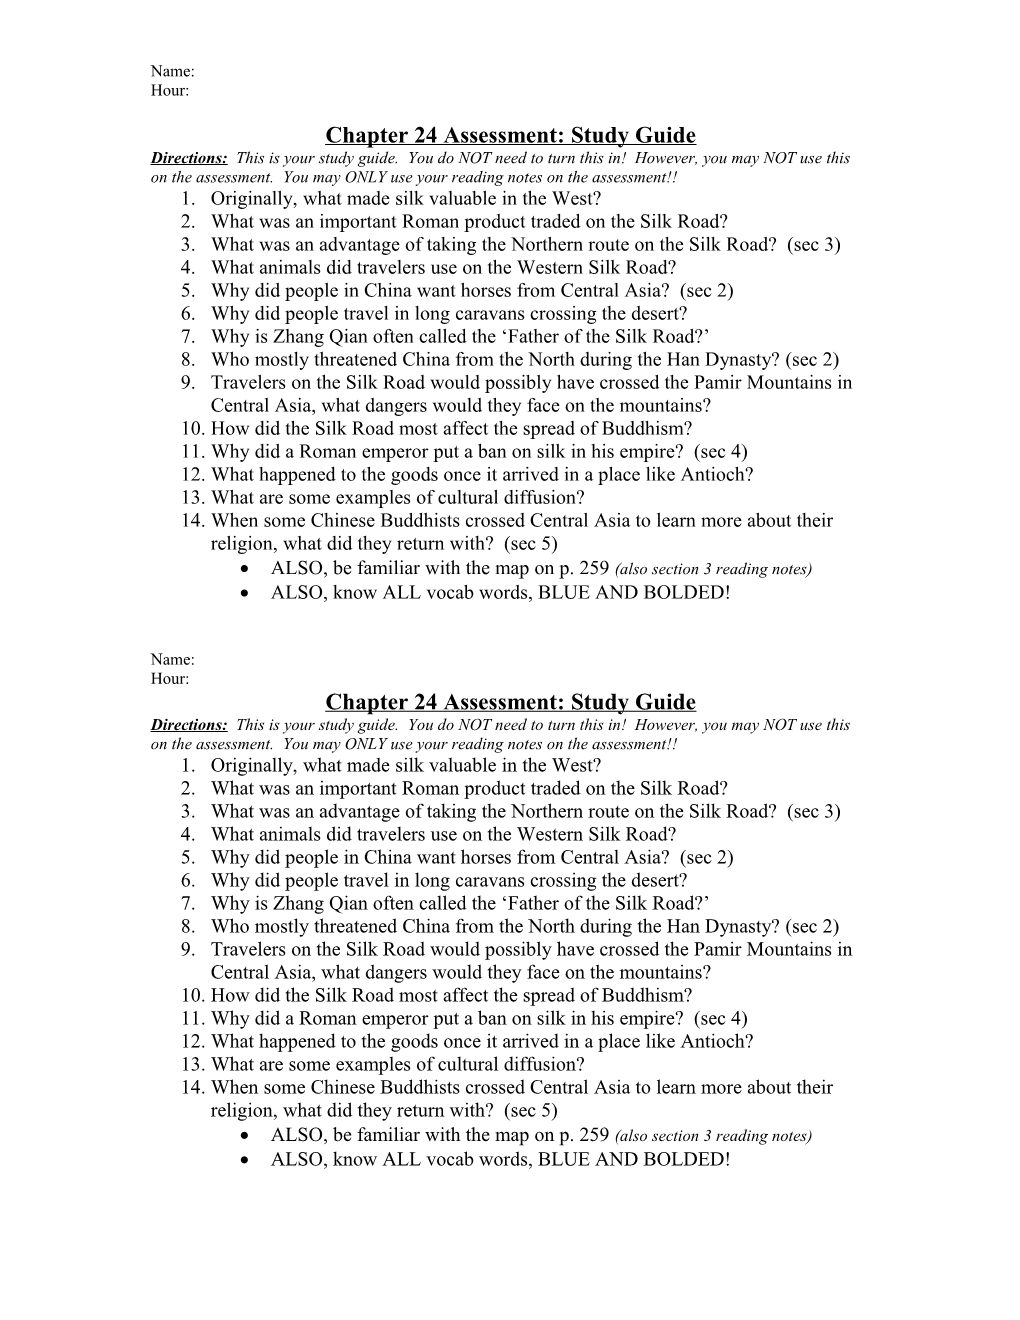 Chapter 24 Assessment: Study Guide